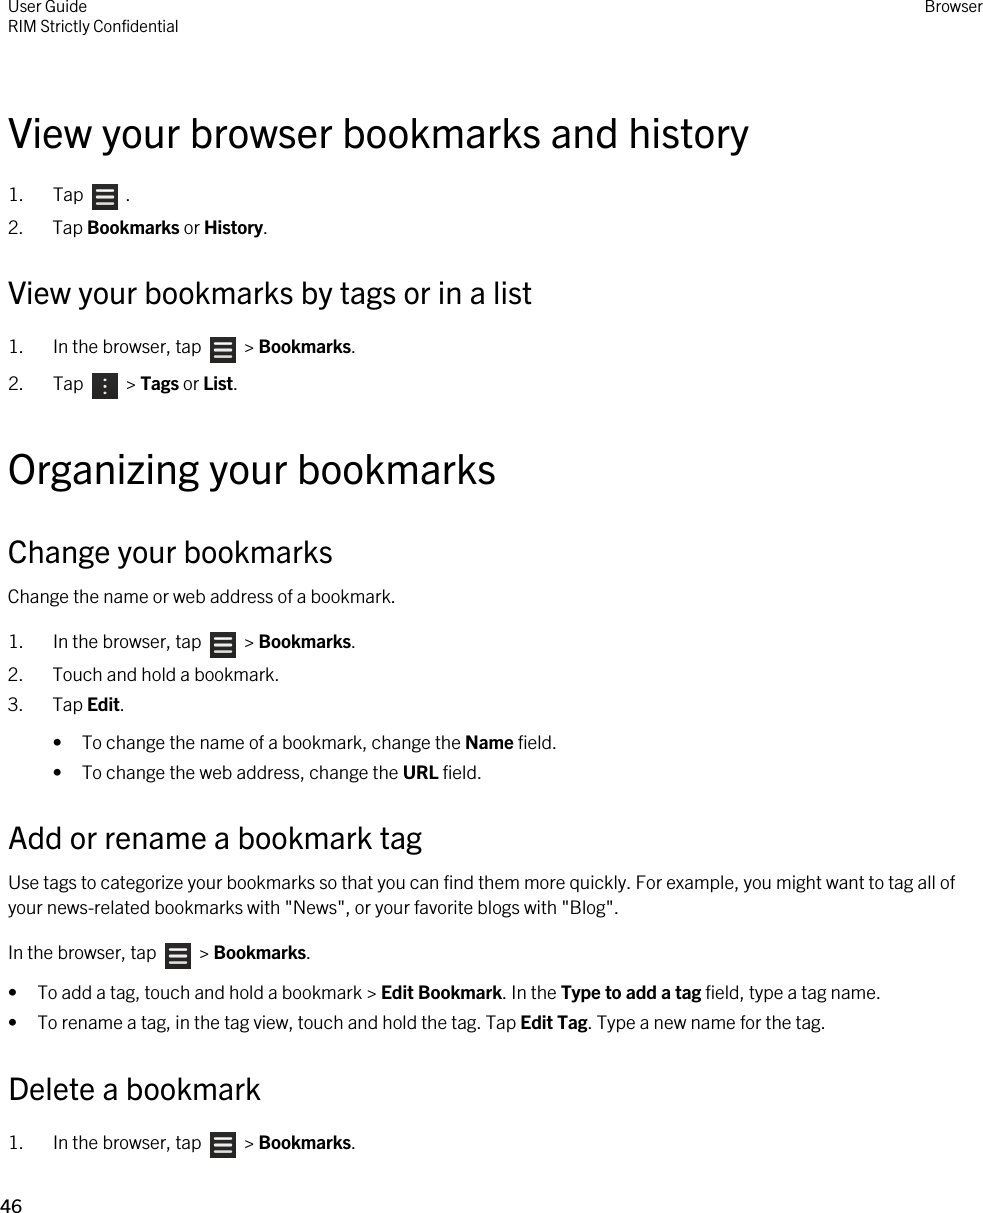 View your browser bookmarks and history1.  Tap    .2. Tap Bookmarks or History.View your bookmarks by tags or in a list1.  In the browser, tap    &gt; Bookmarks.2.  Tap    &gt; Tags or List.Organizing your bookmarksChange your bookmarksChange the name or web address of a bookmark.1.  In the browser, tap    &gt; Bookmarks.2. Touch and hold a bookmark.3. Tap Edit.• To change the name of a bookmark, change the Name field.• To change the web address, change the URL field.Add or rename a bookmark tagUse tags to categorize your bookmarks so that you can find them more quickly. For example, you might want to tag all of your news-related bookmarks with &quot;News&quot;, or your favorite blogs with &quot;Blog&quot;.In the browser, tap    &gt; Bookmarks.• To add a tag, touch and hold a bookmark &gt; Edit Bookmark. In the Type to add a tag field, type a tag name.• To rename a tag, in the tag view, touch and hold the tag. Tap Edit Tag. Type a new name for the tag.Delete a bookmark1.  In the browser, tap    &gt; Bookmarks.User GuideRIM Strictly Confidential Browser46 